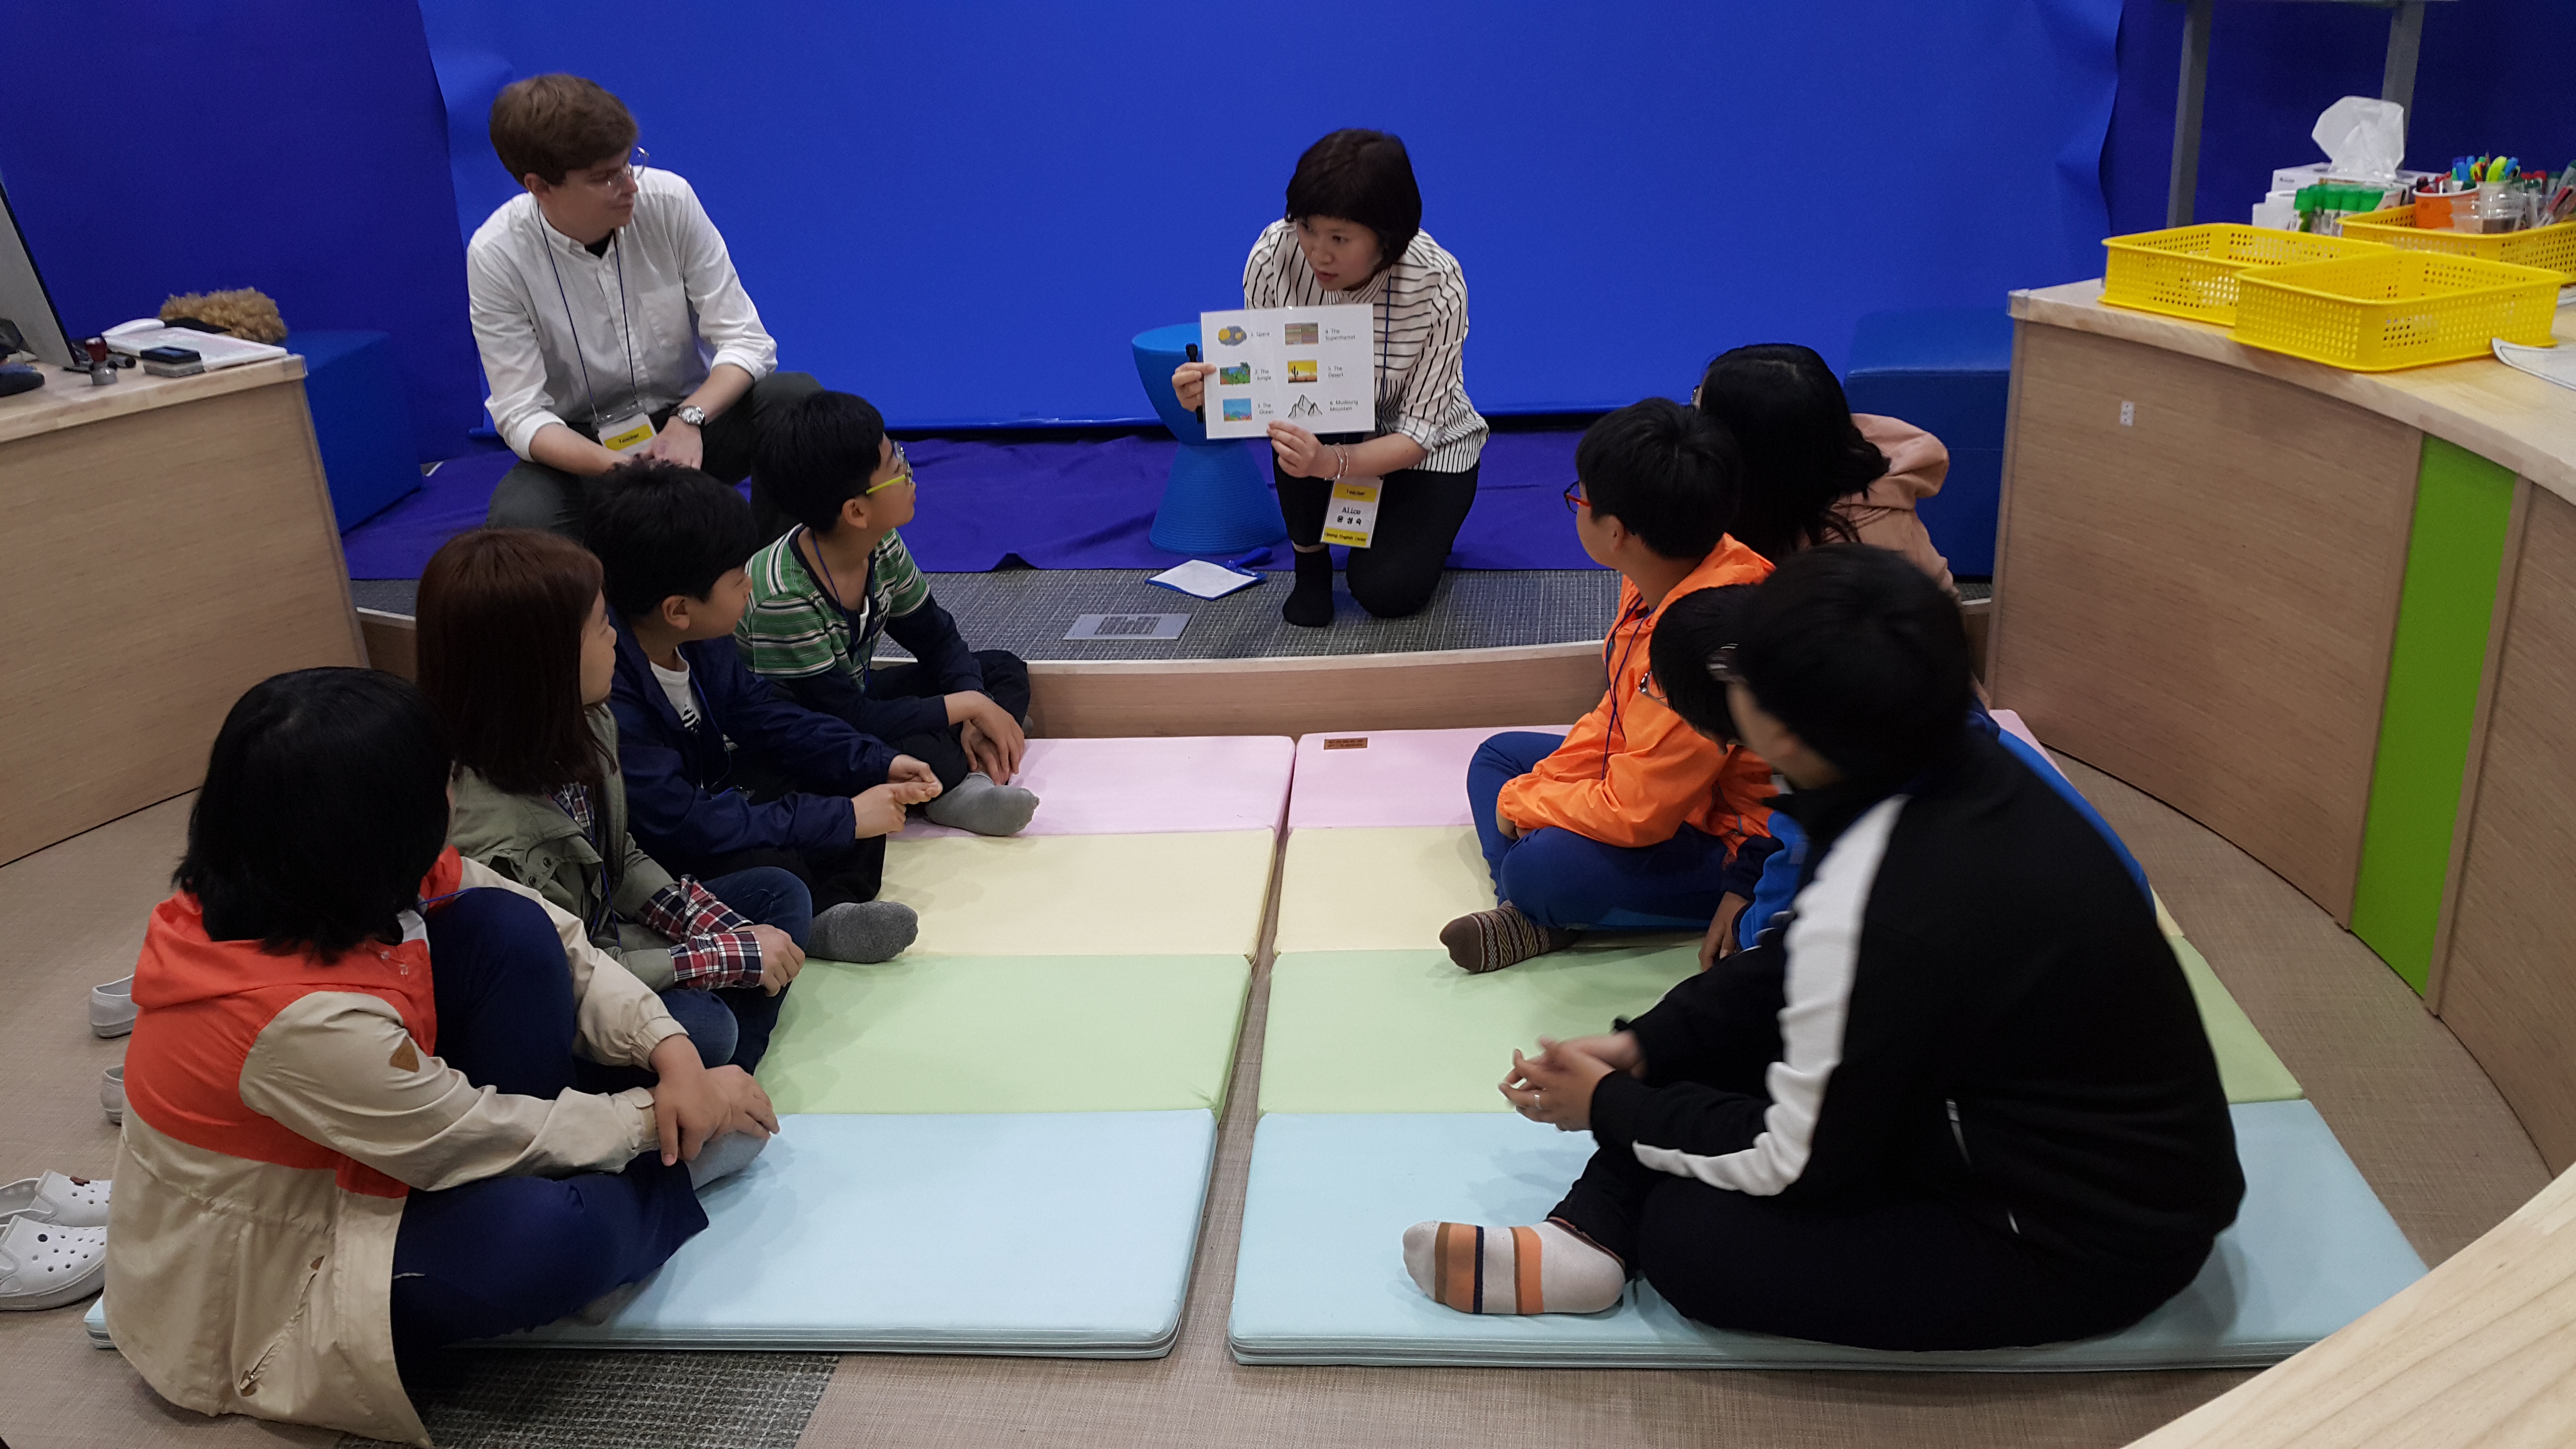 Korea’s Early English Education Policy for the New Millennium